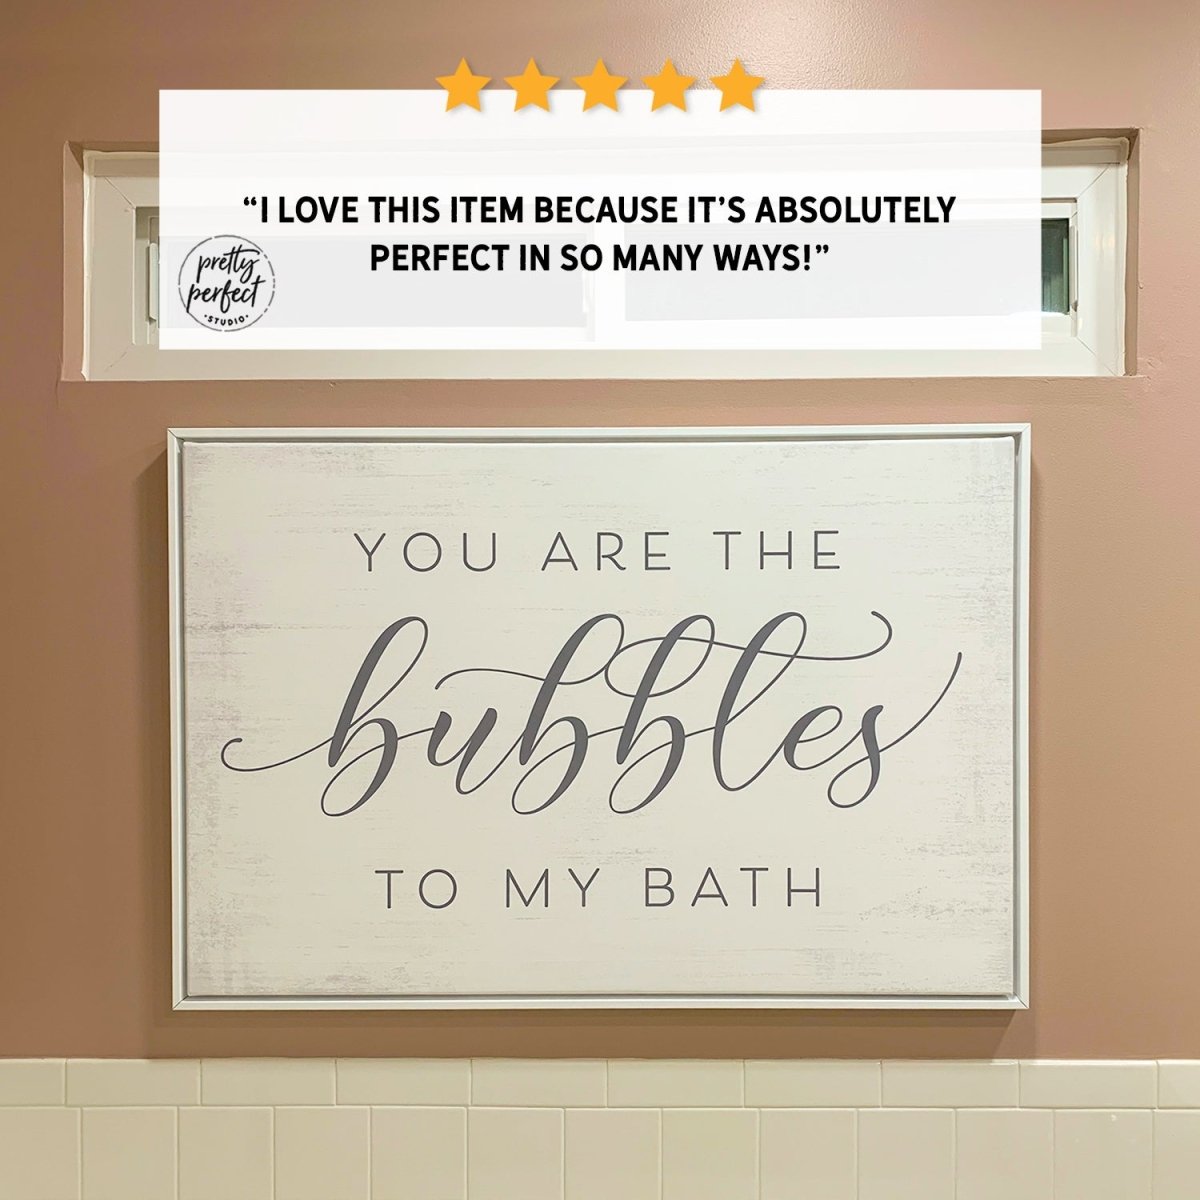 Customer product review for you are the bubbles to my bath sign by Pretty Perfect Studio